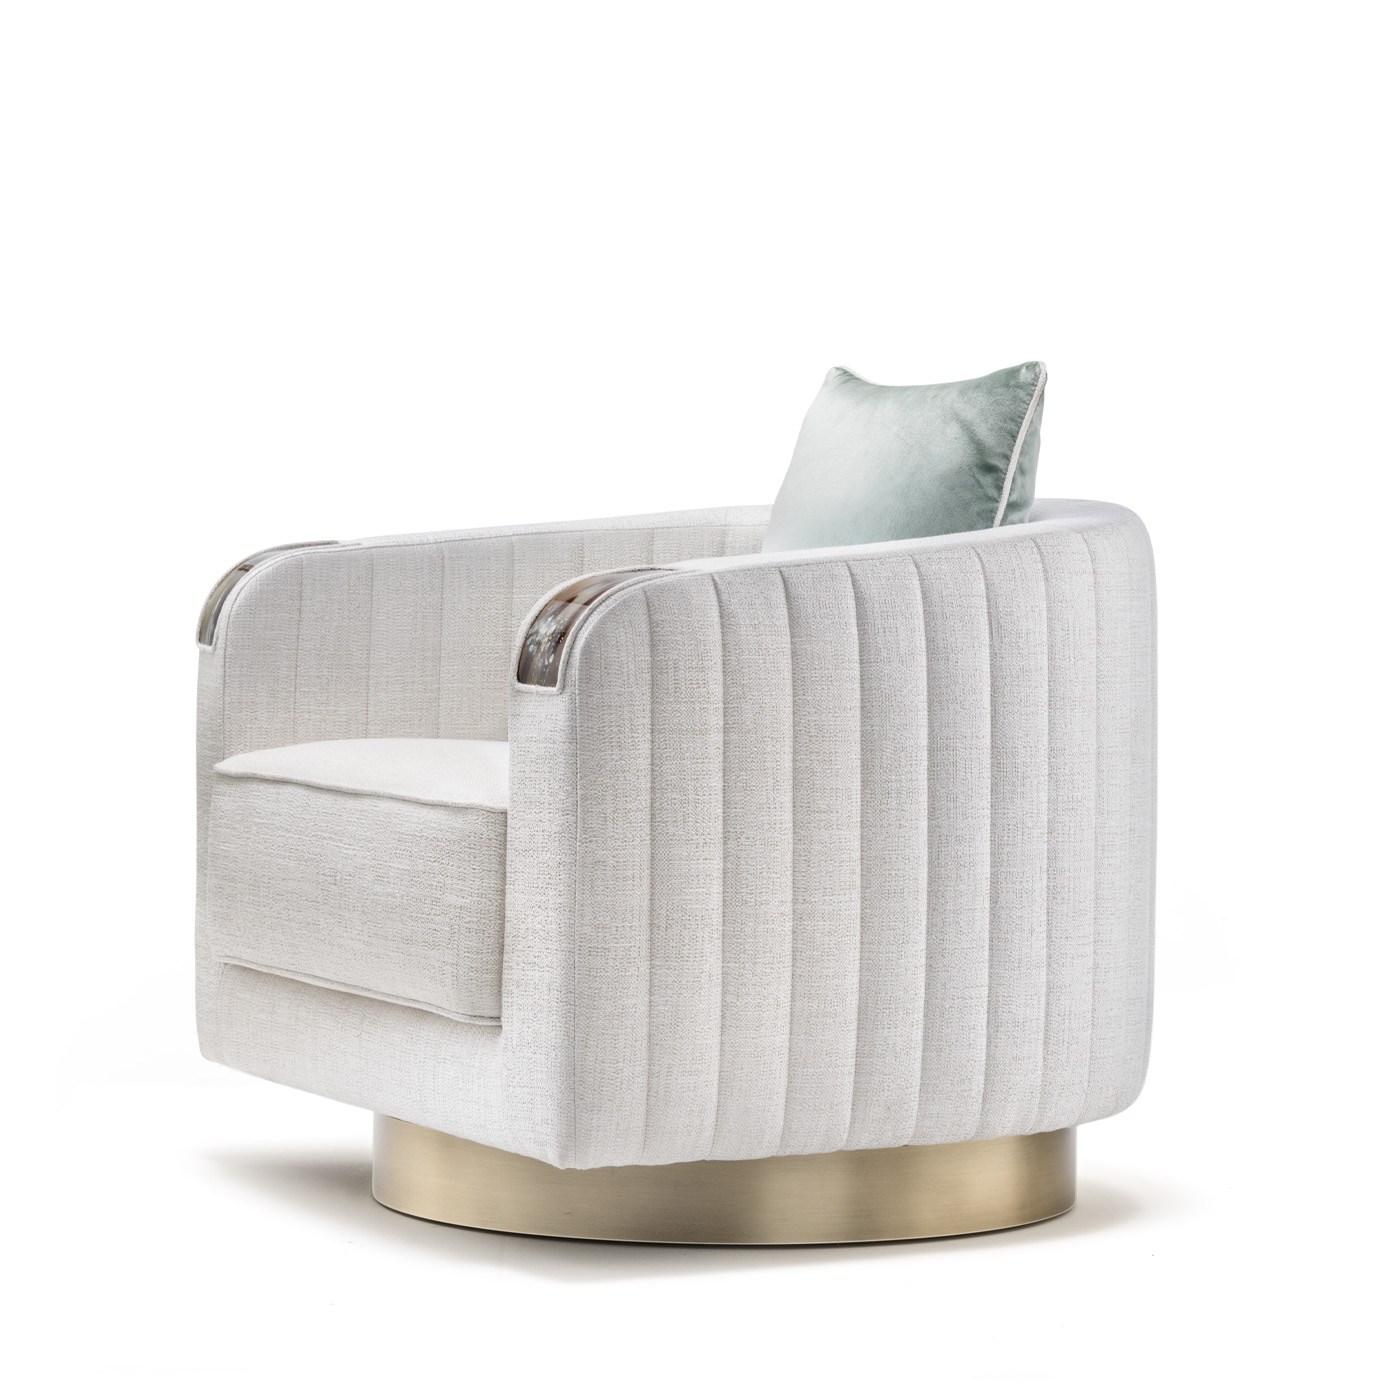 Sofas and seats - Rea armchair with horn armrests mod. 7024 white - Arcahorn